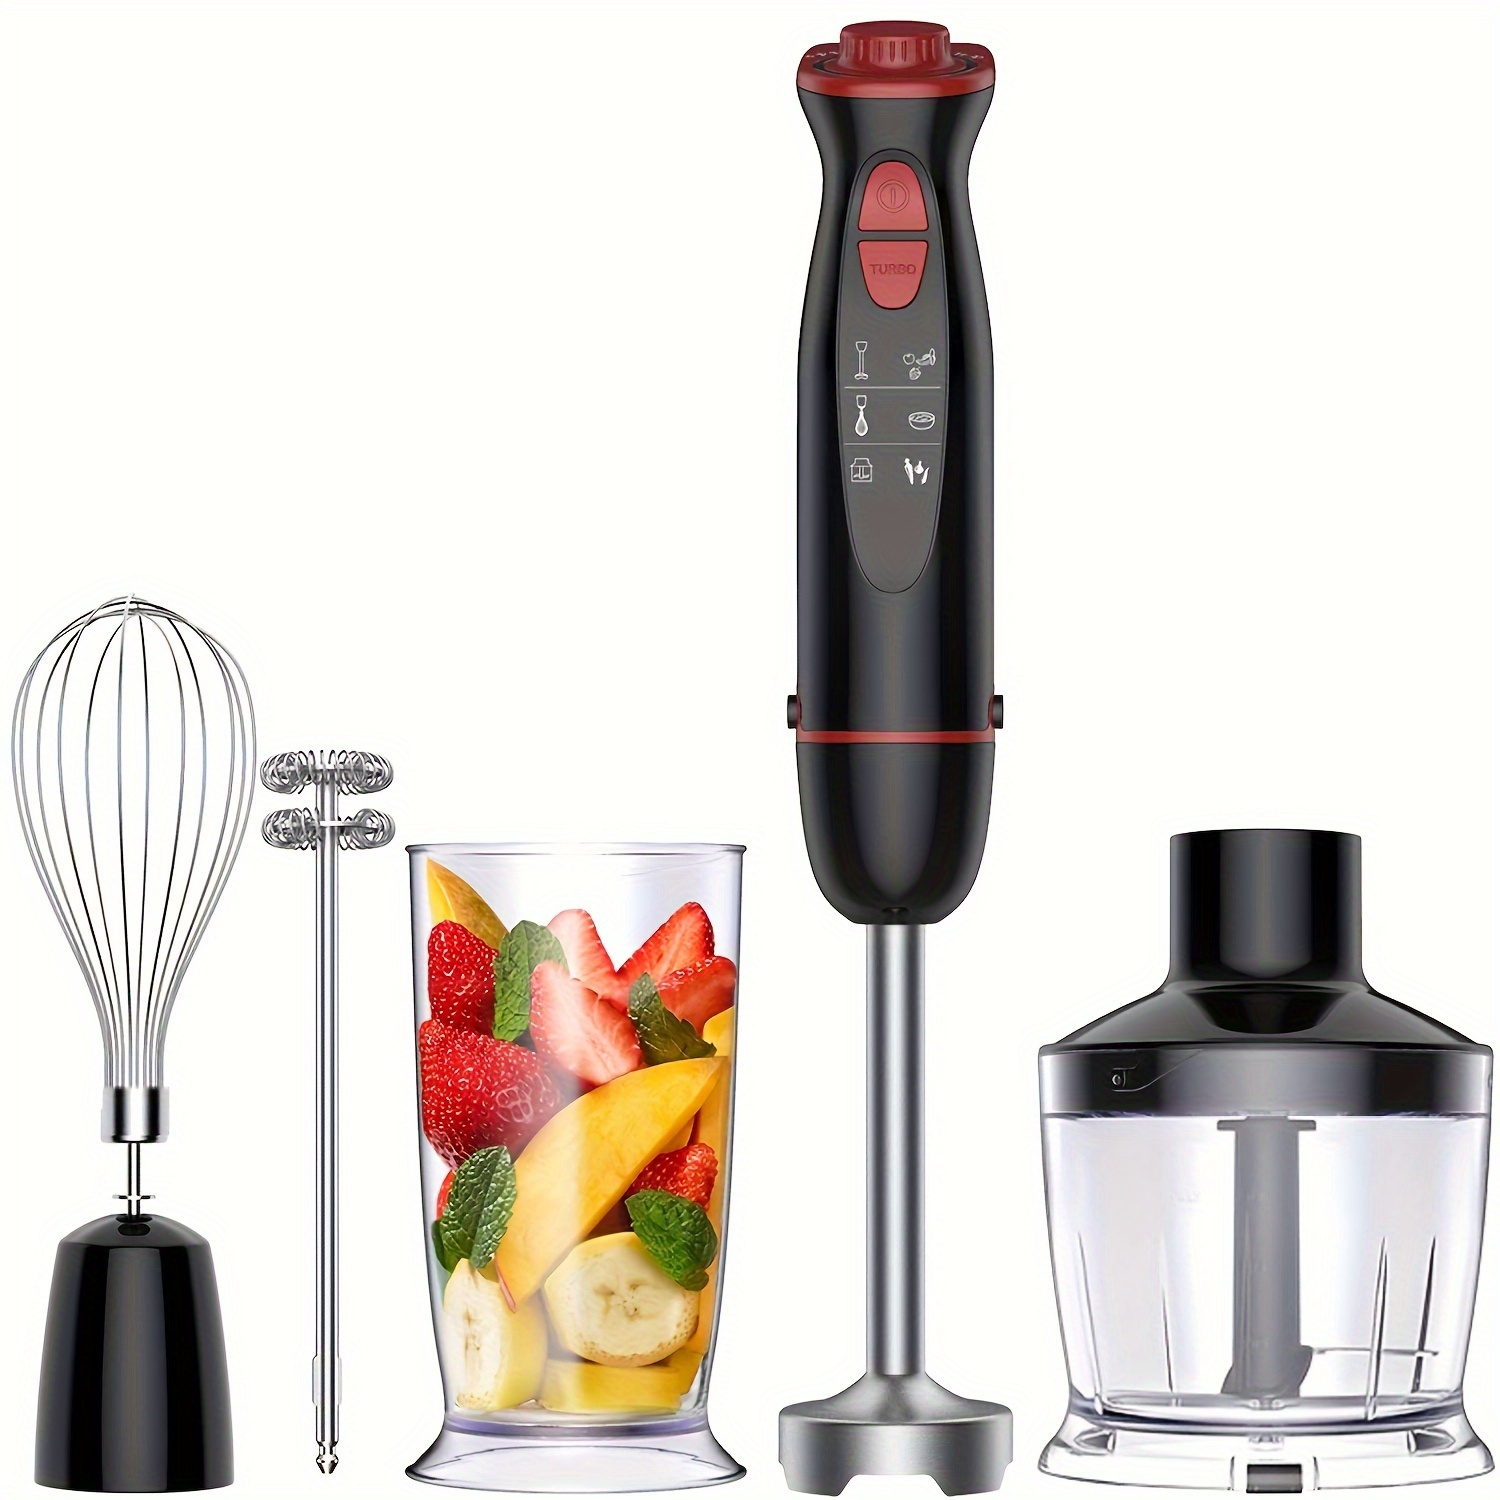 KOIOS 5-in-1 Immersion Hand Blender, Titanium Plated Blade, includes 600ml  Mixing Beaker, 800ml Chopper, Whisk Attachment, and Milk Frother